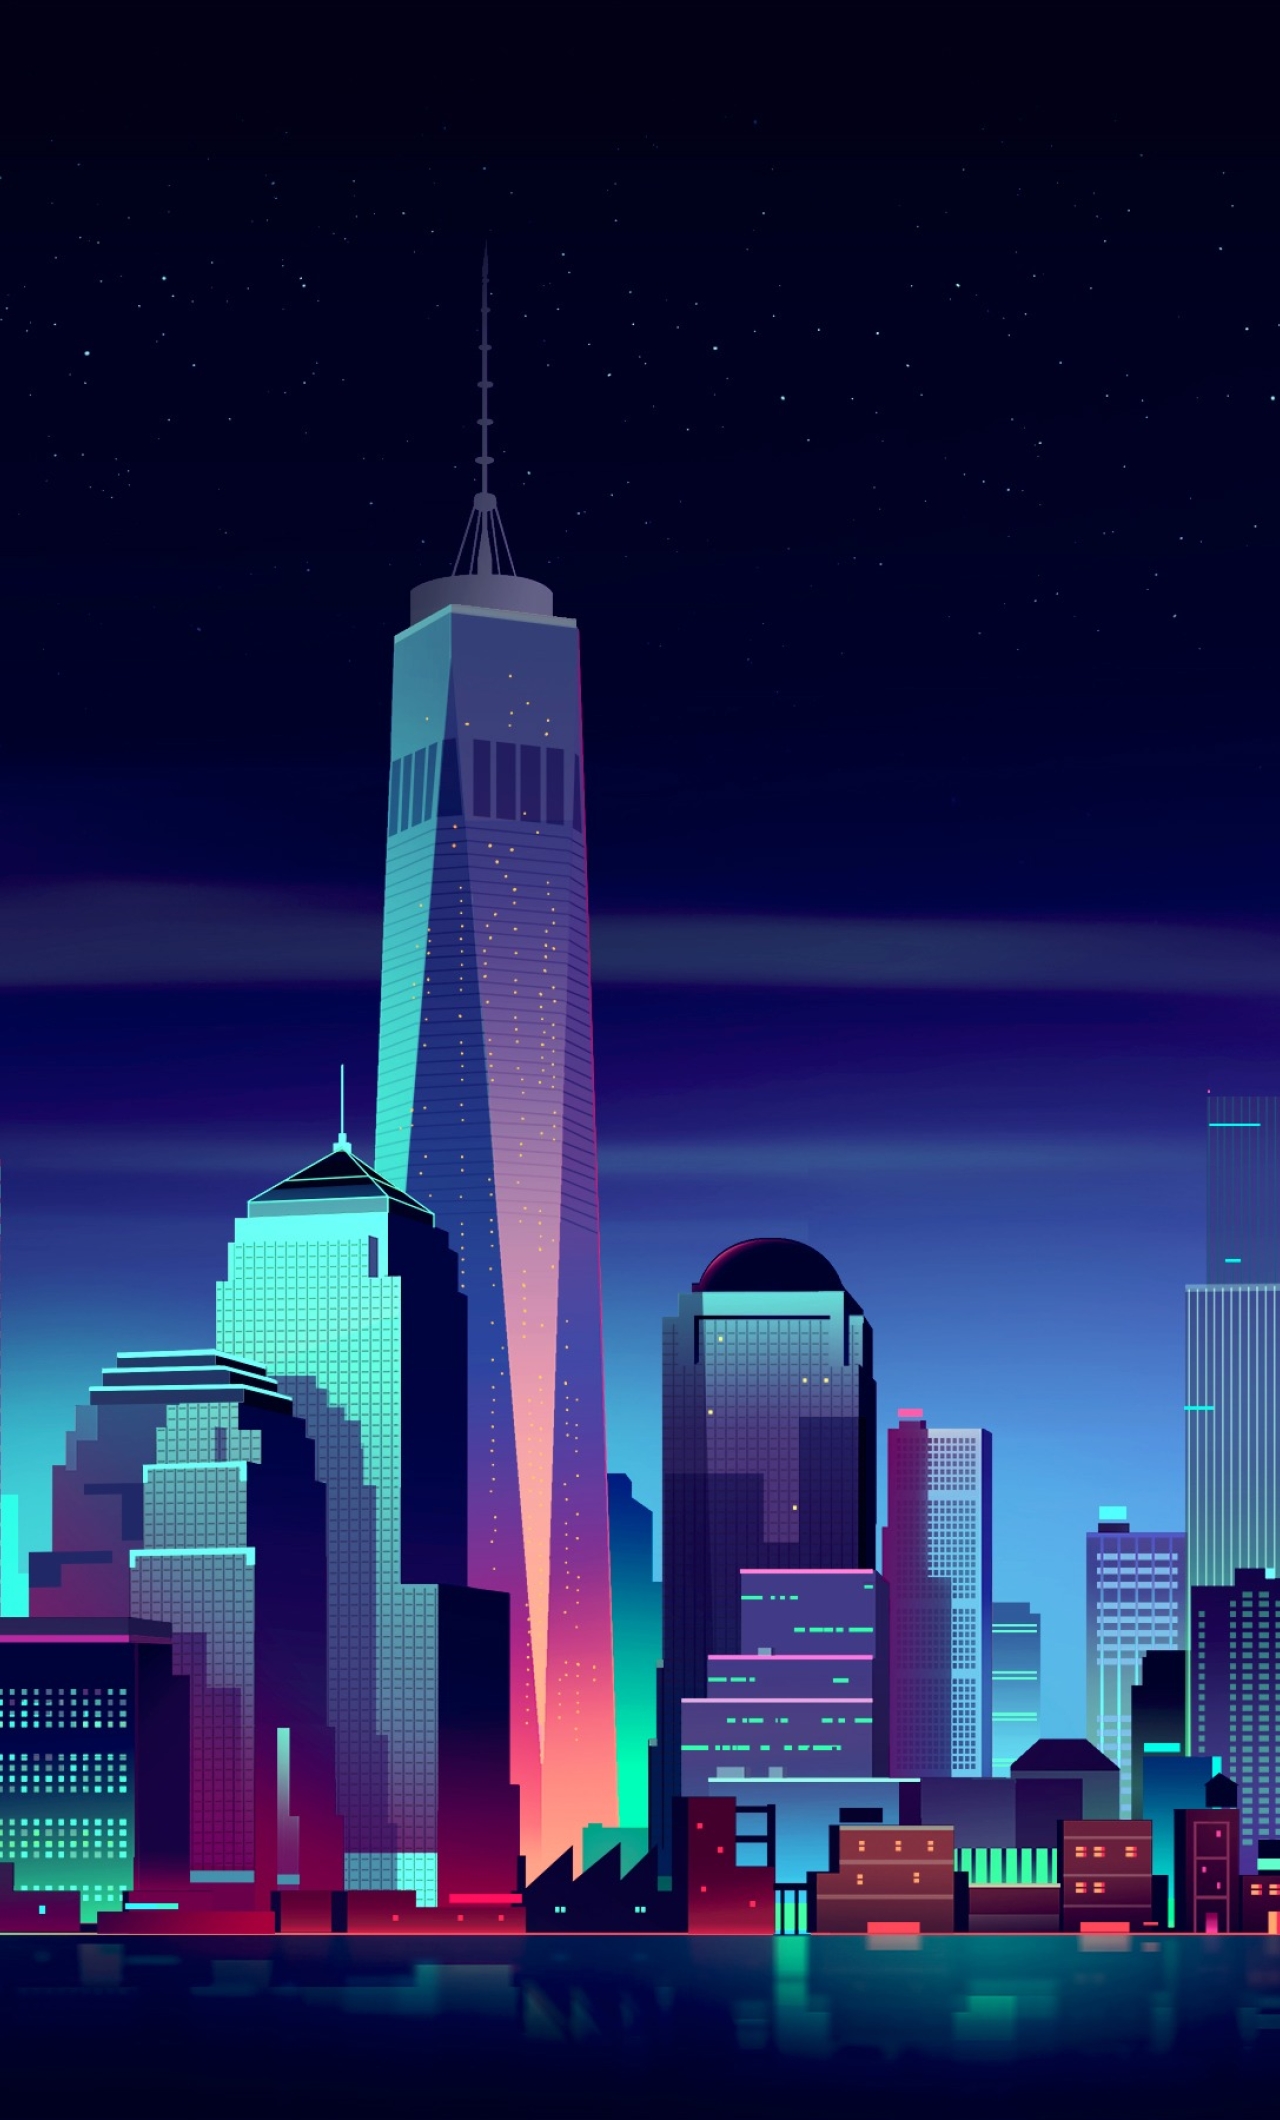 1280x21 Nyc Minimalist Iphone 6 Plus Wallpaper Hd Minimalist 4k Wallpapers Images Photos And Background